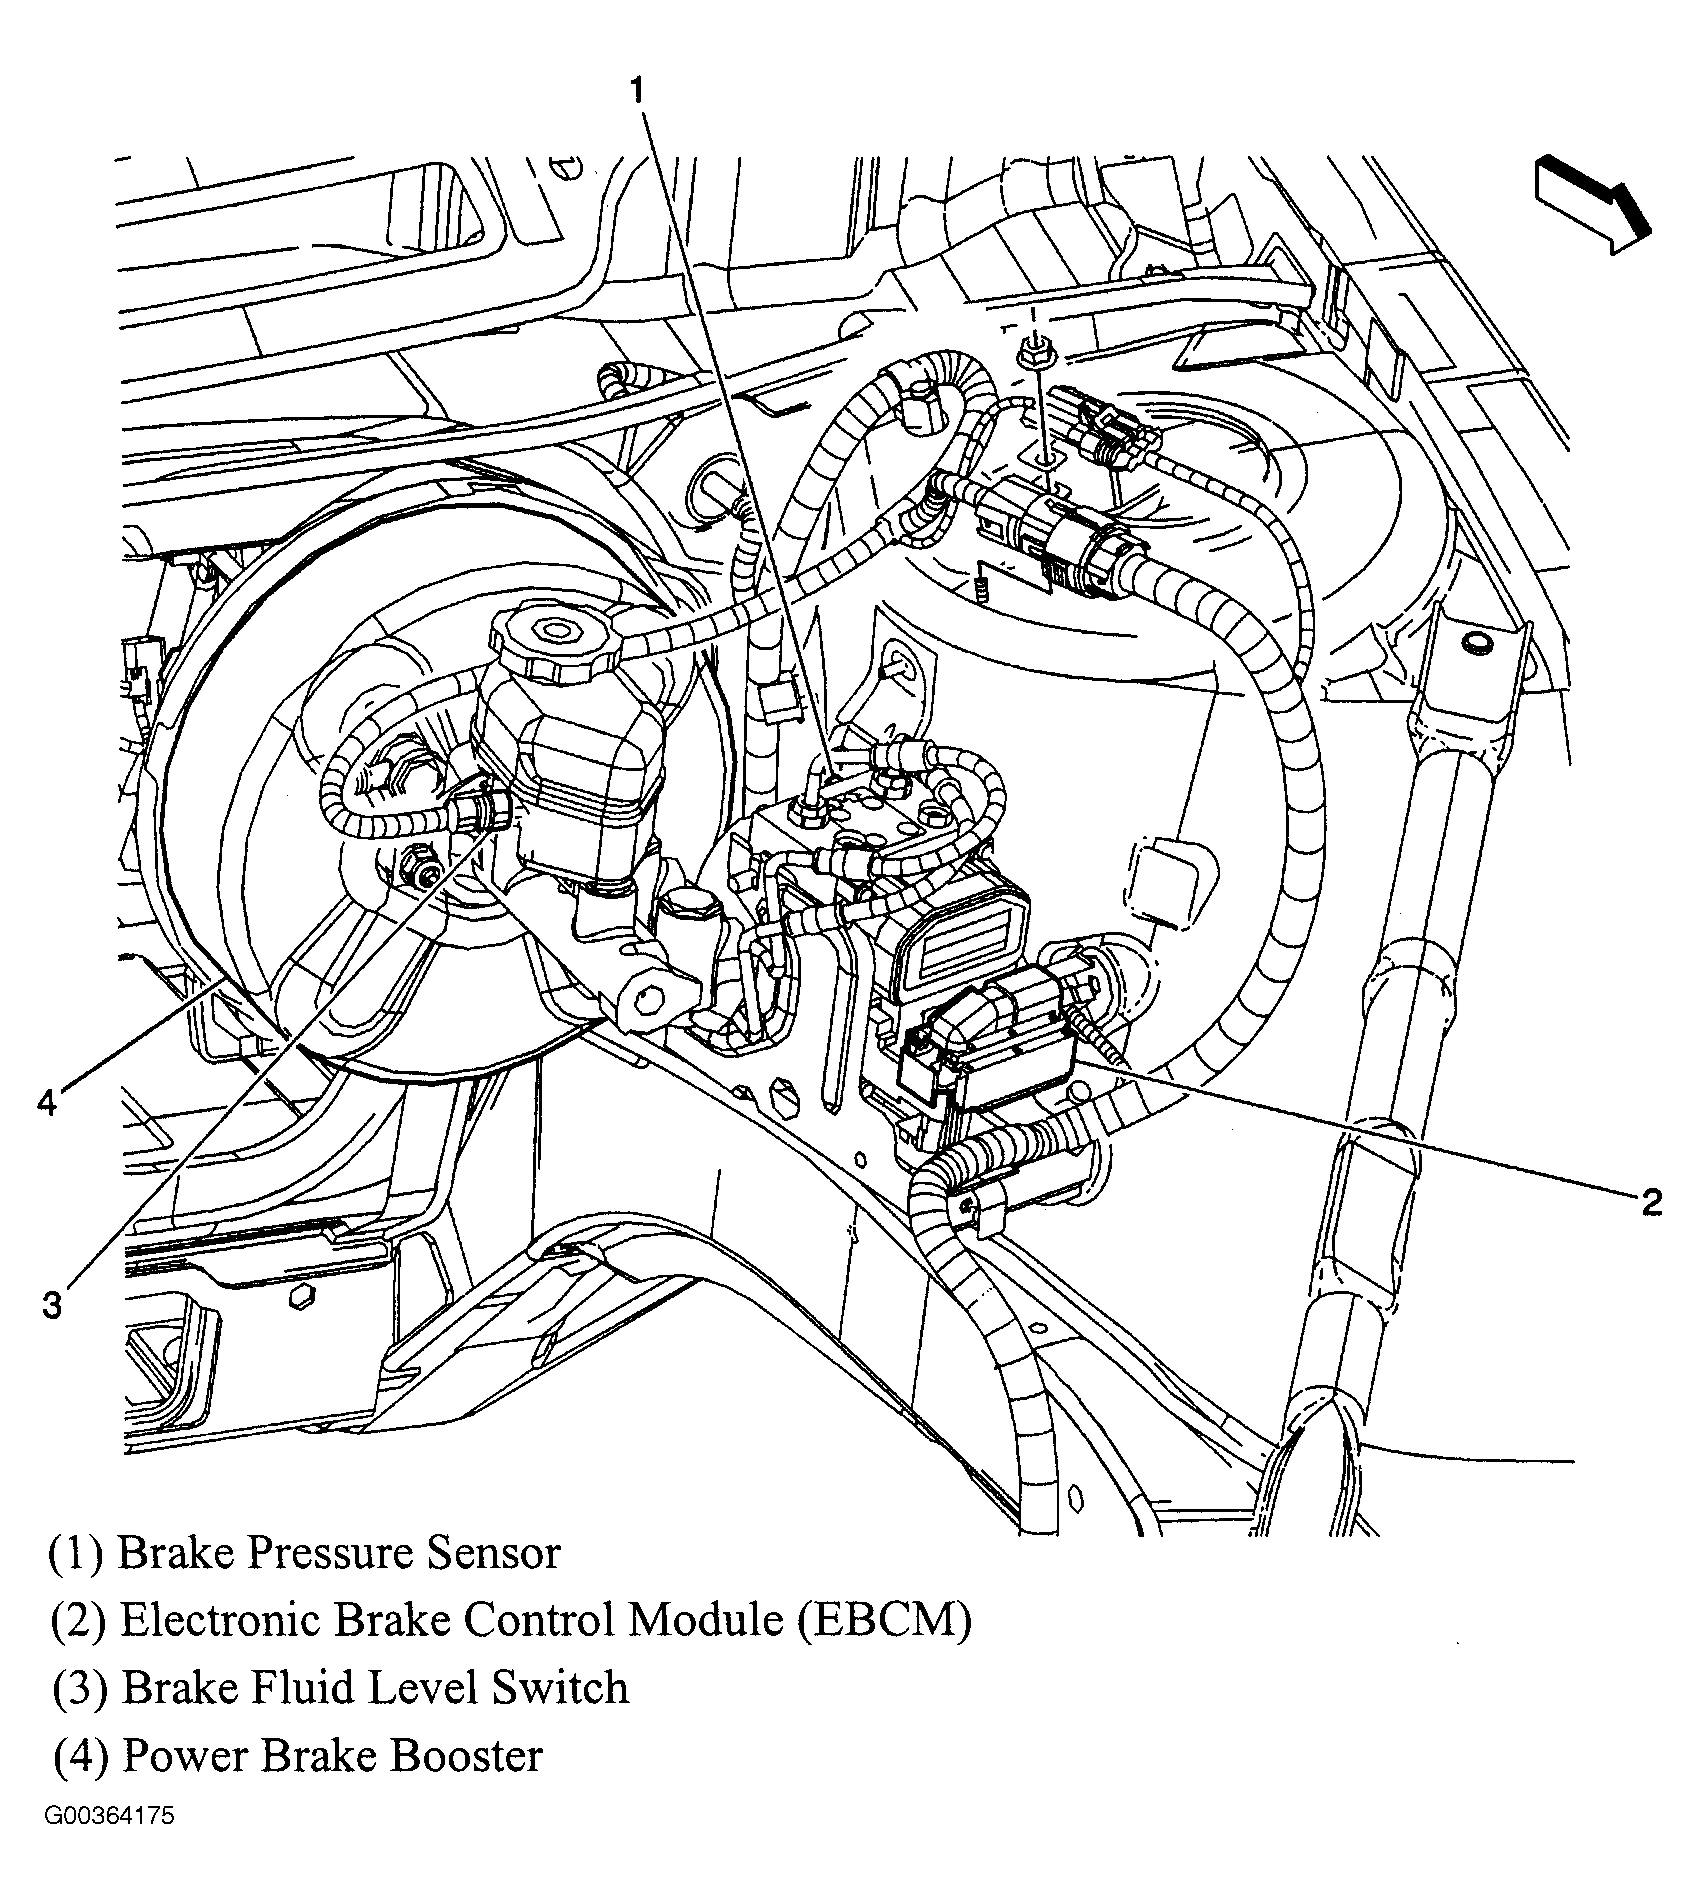 Buick Allure CXL 2006 - Component Locations -  Left Rear Of Engine Compartment